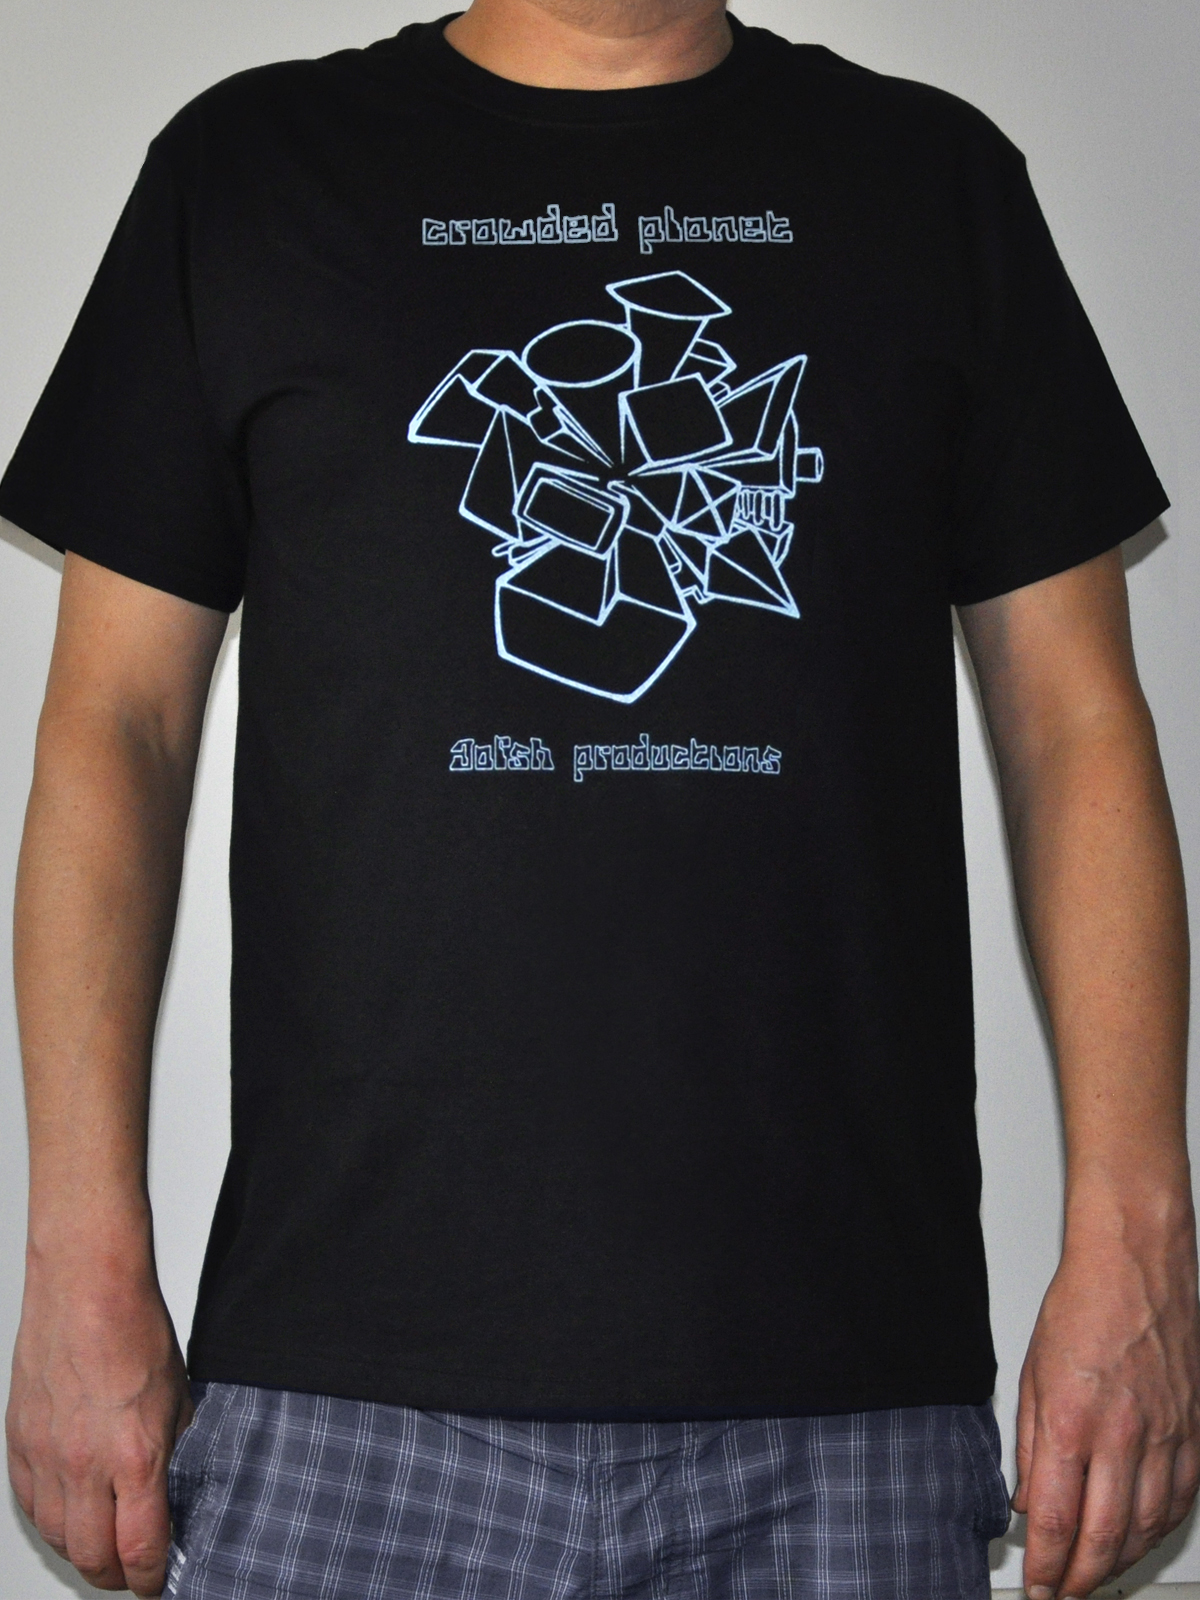 t-shirt depicting tall urban buildings obscuring the globe completely.